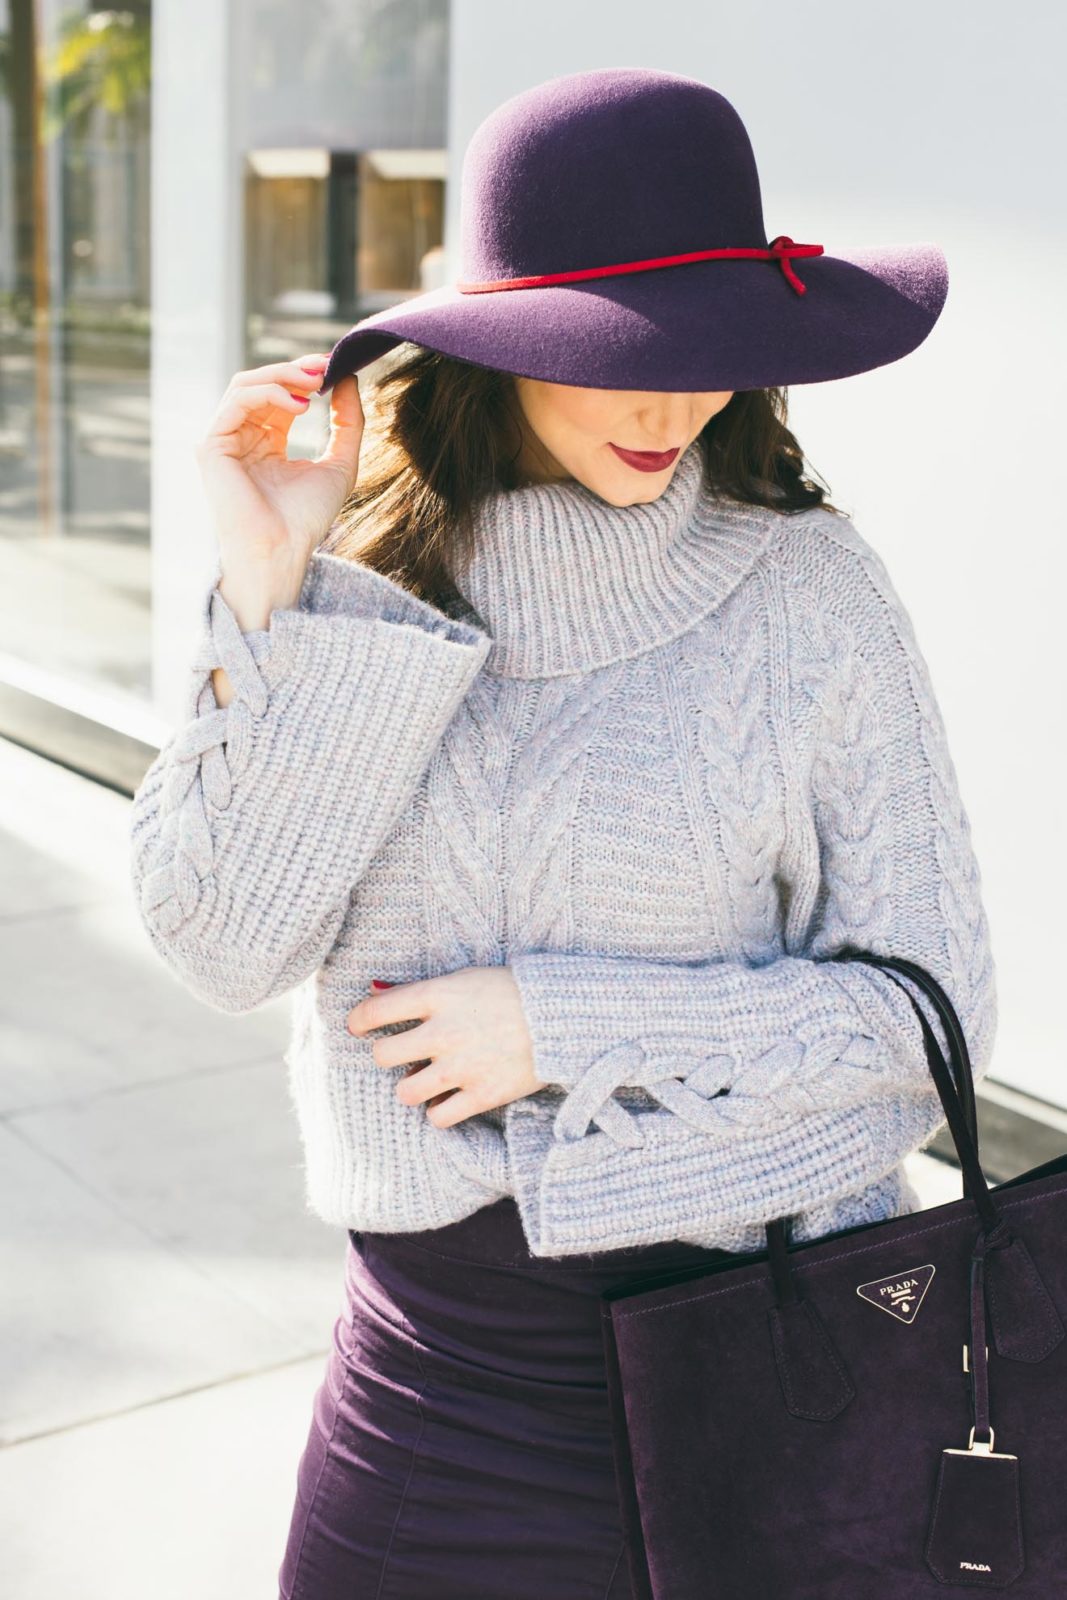 Cute winter looks and Bell Sleeve Sweaters by top Los Angeles Fashion Blogger Laura Lily, Purple suede prada bag